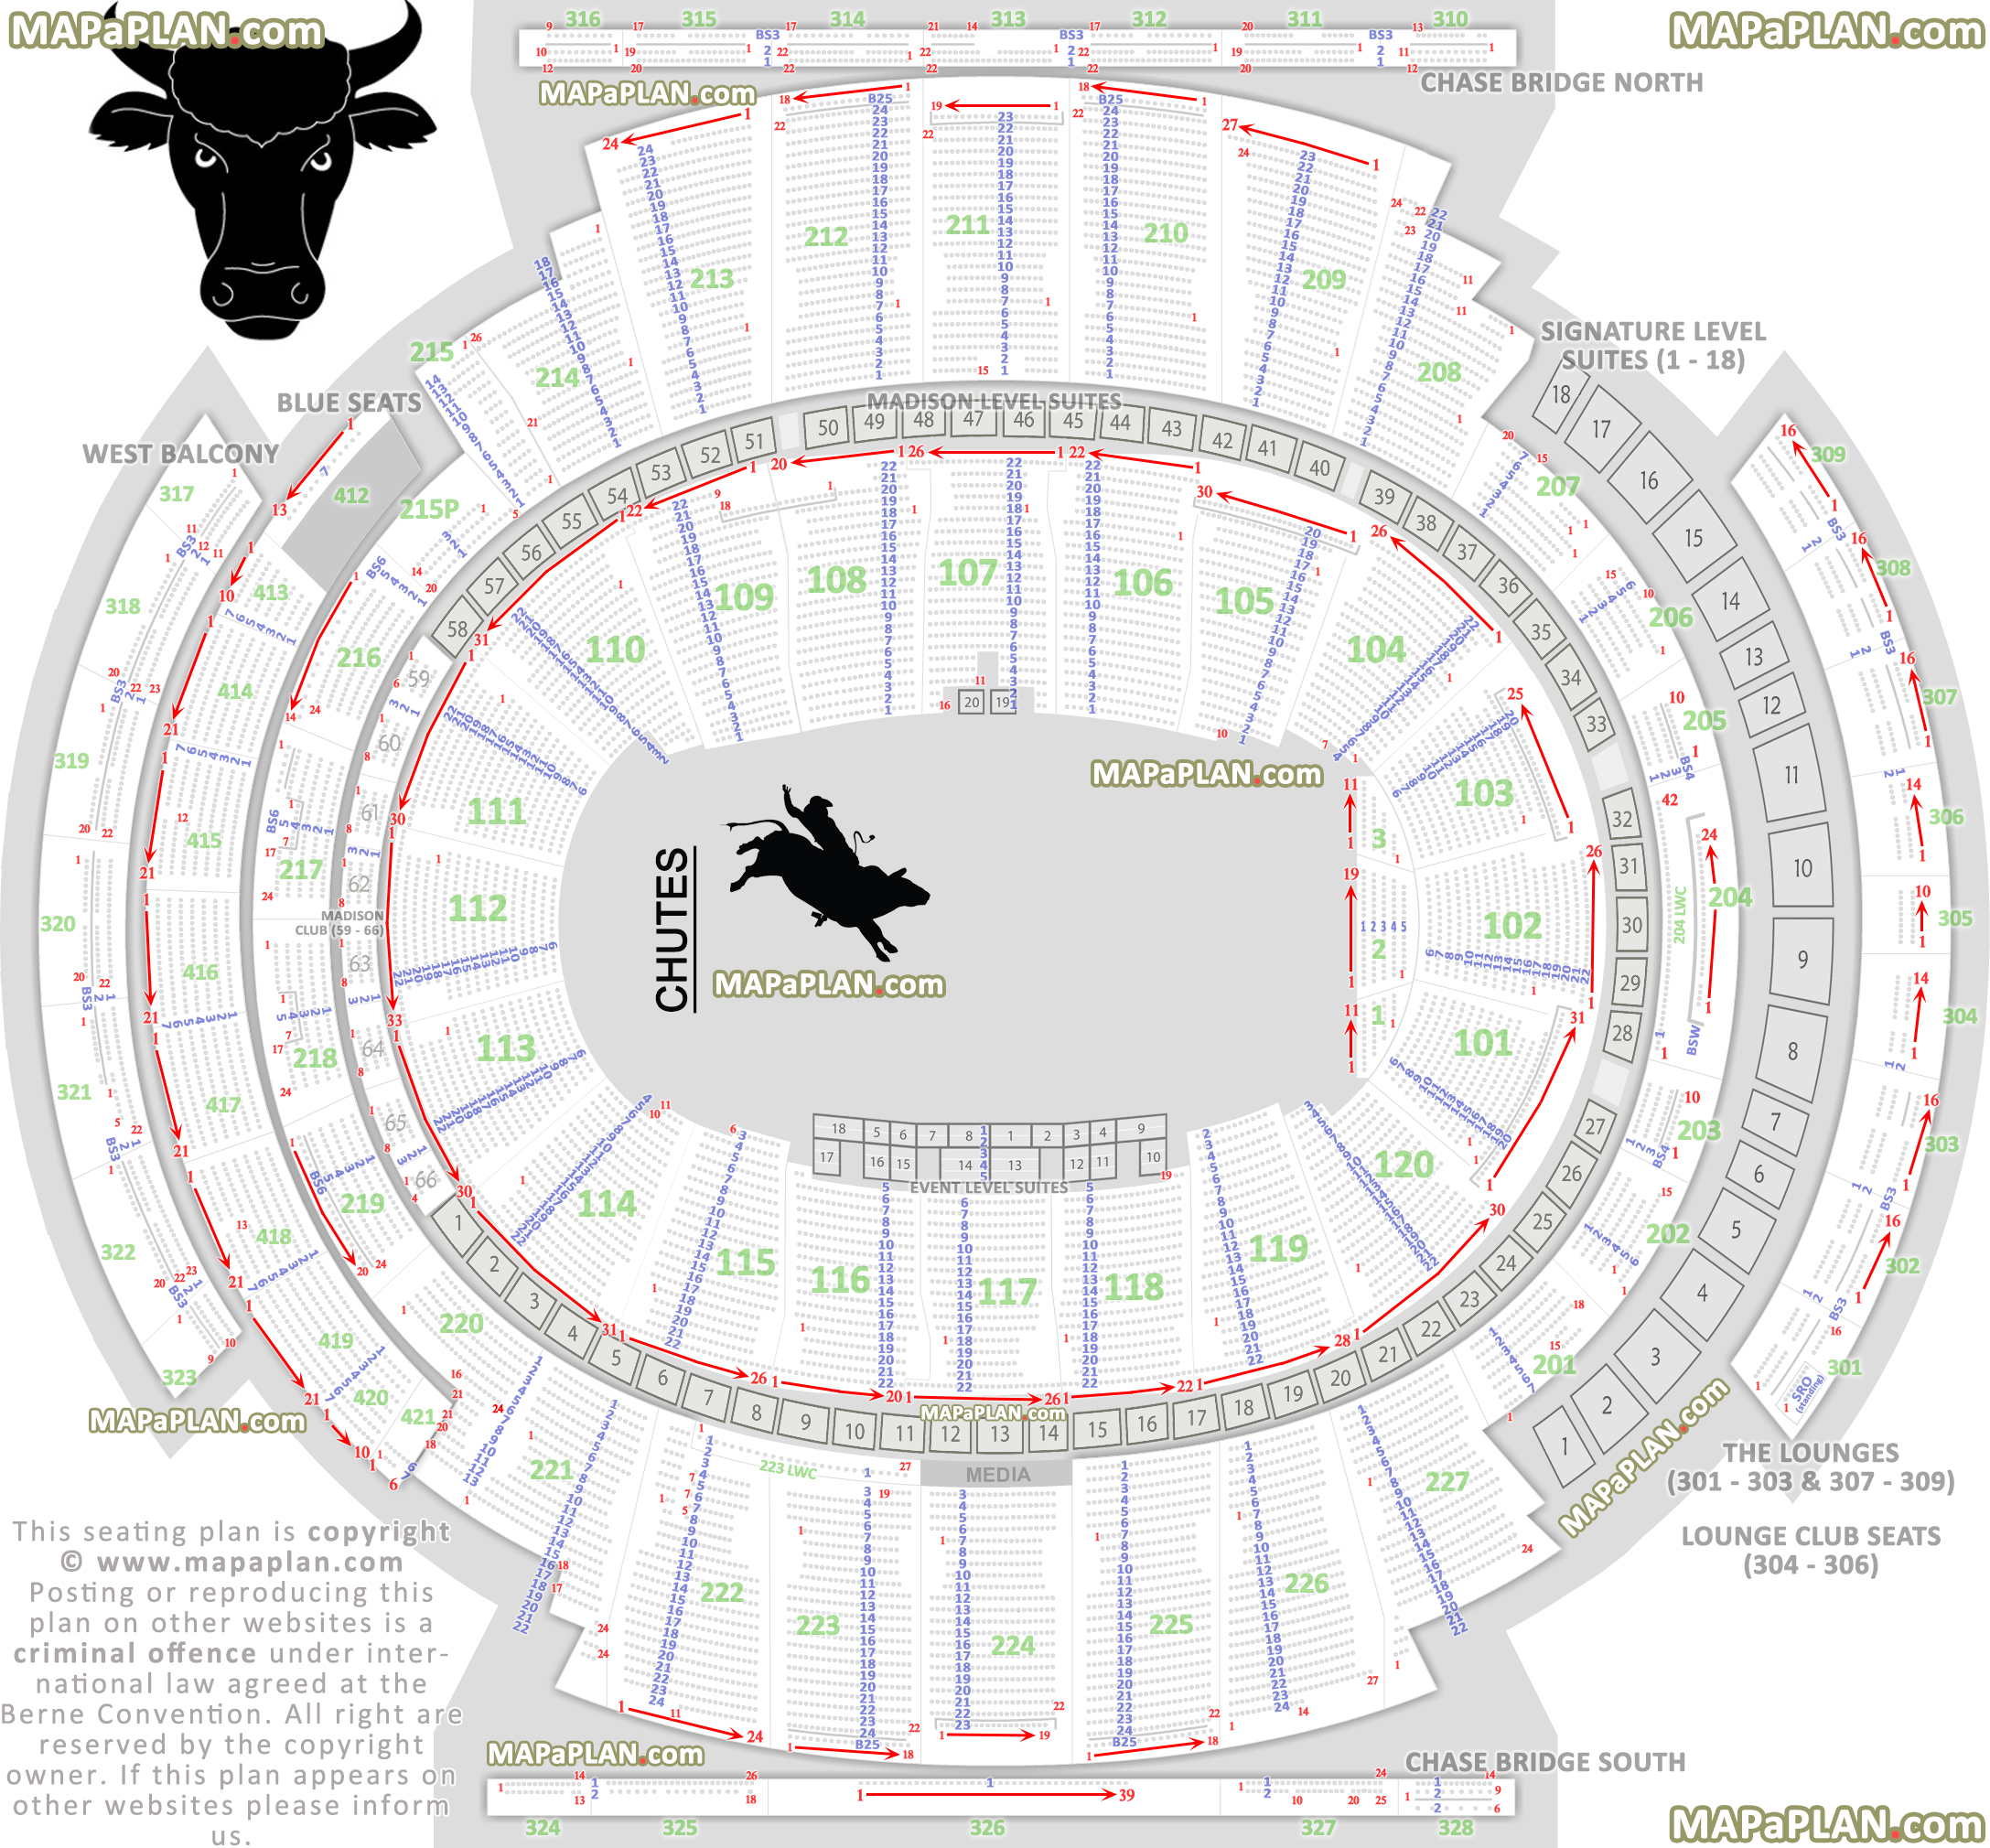 Madison Square Garden seating chart PBR professional bull riders invitational rodeo